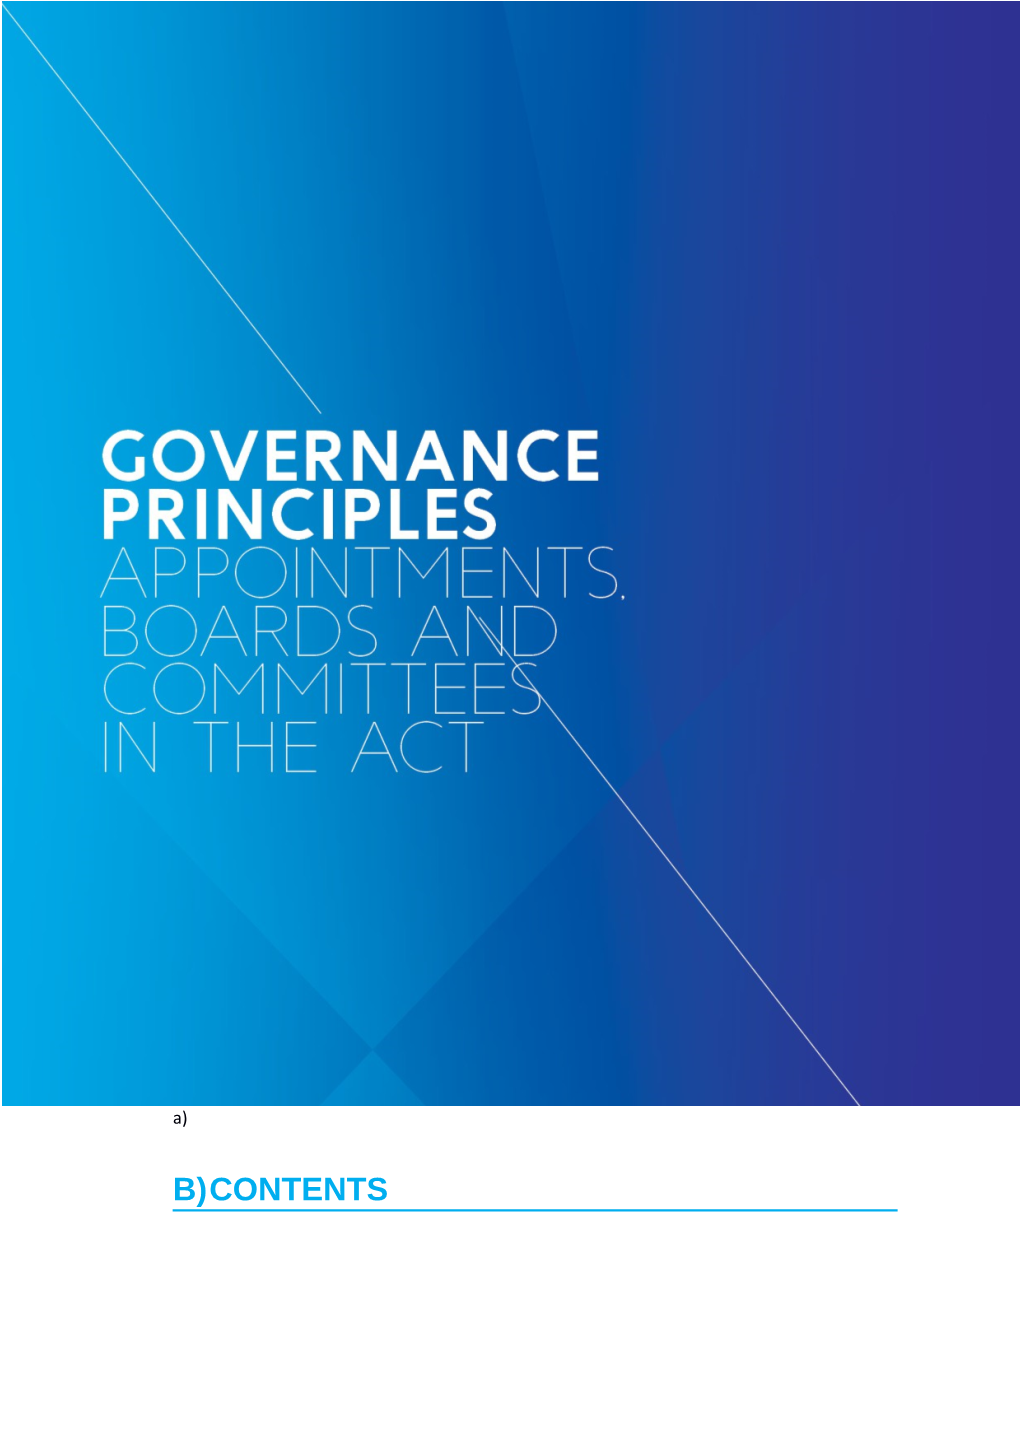 Part a Governance Principles Appointments, Boards, and Committees in the Act